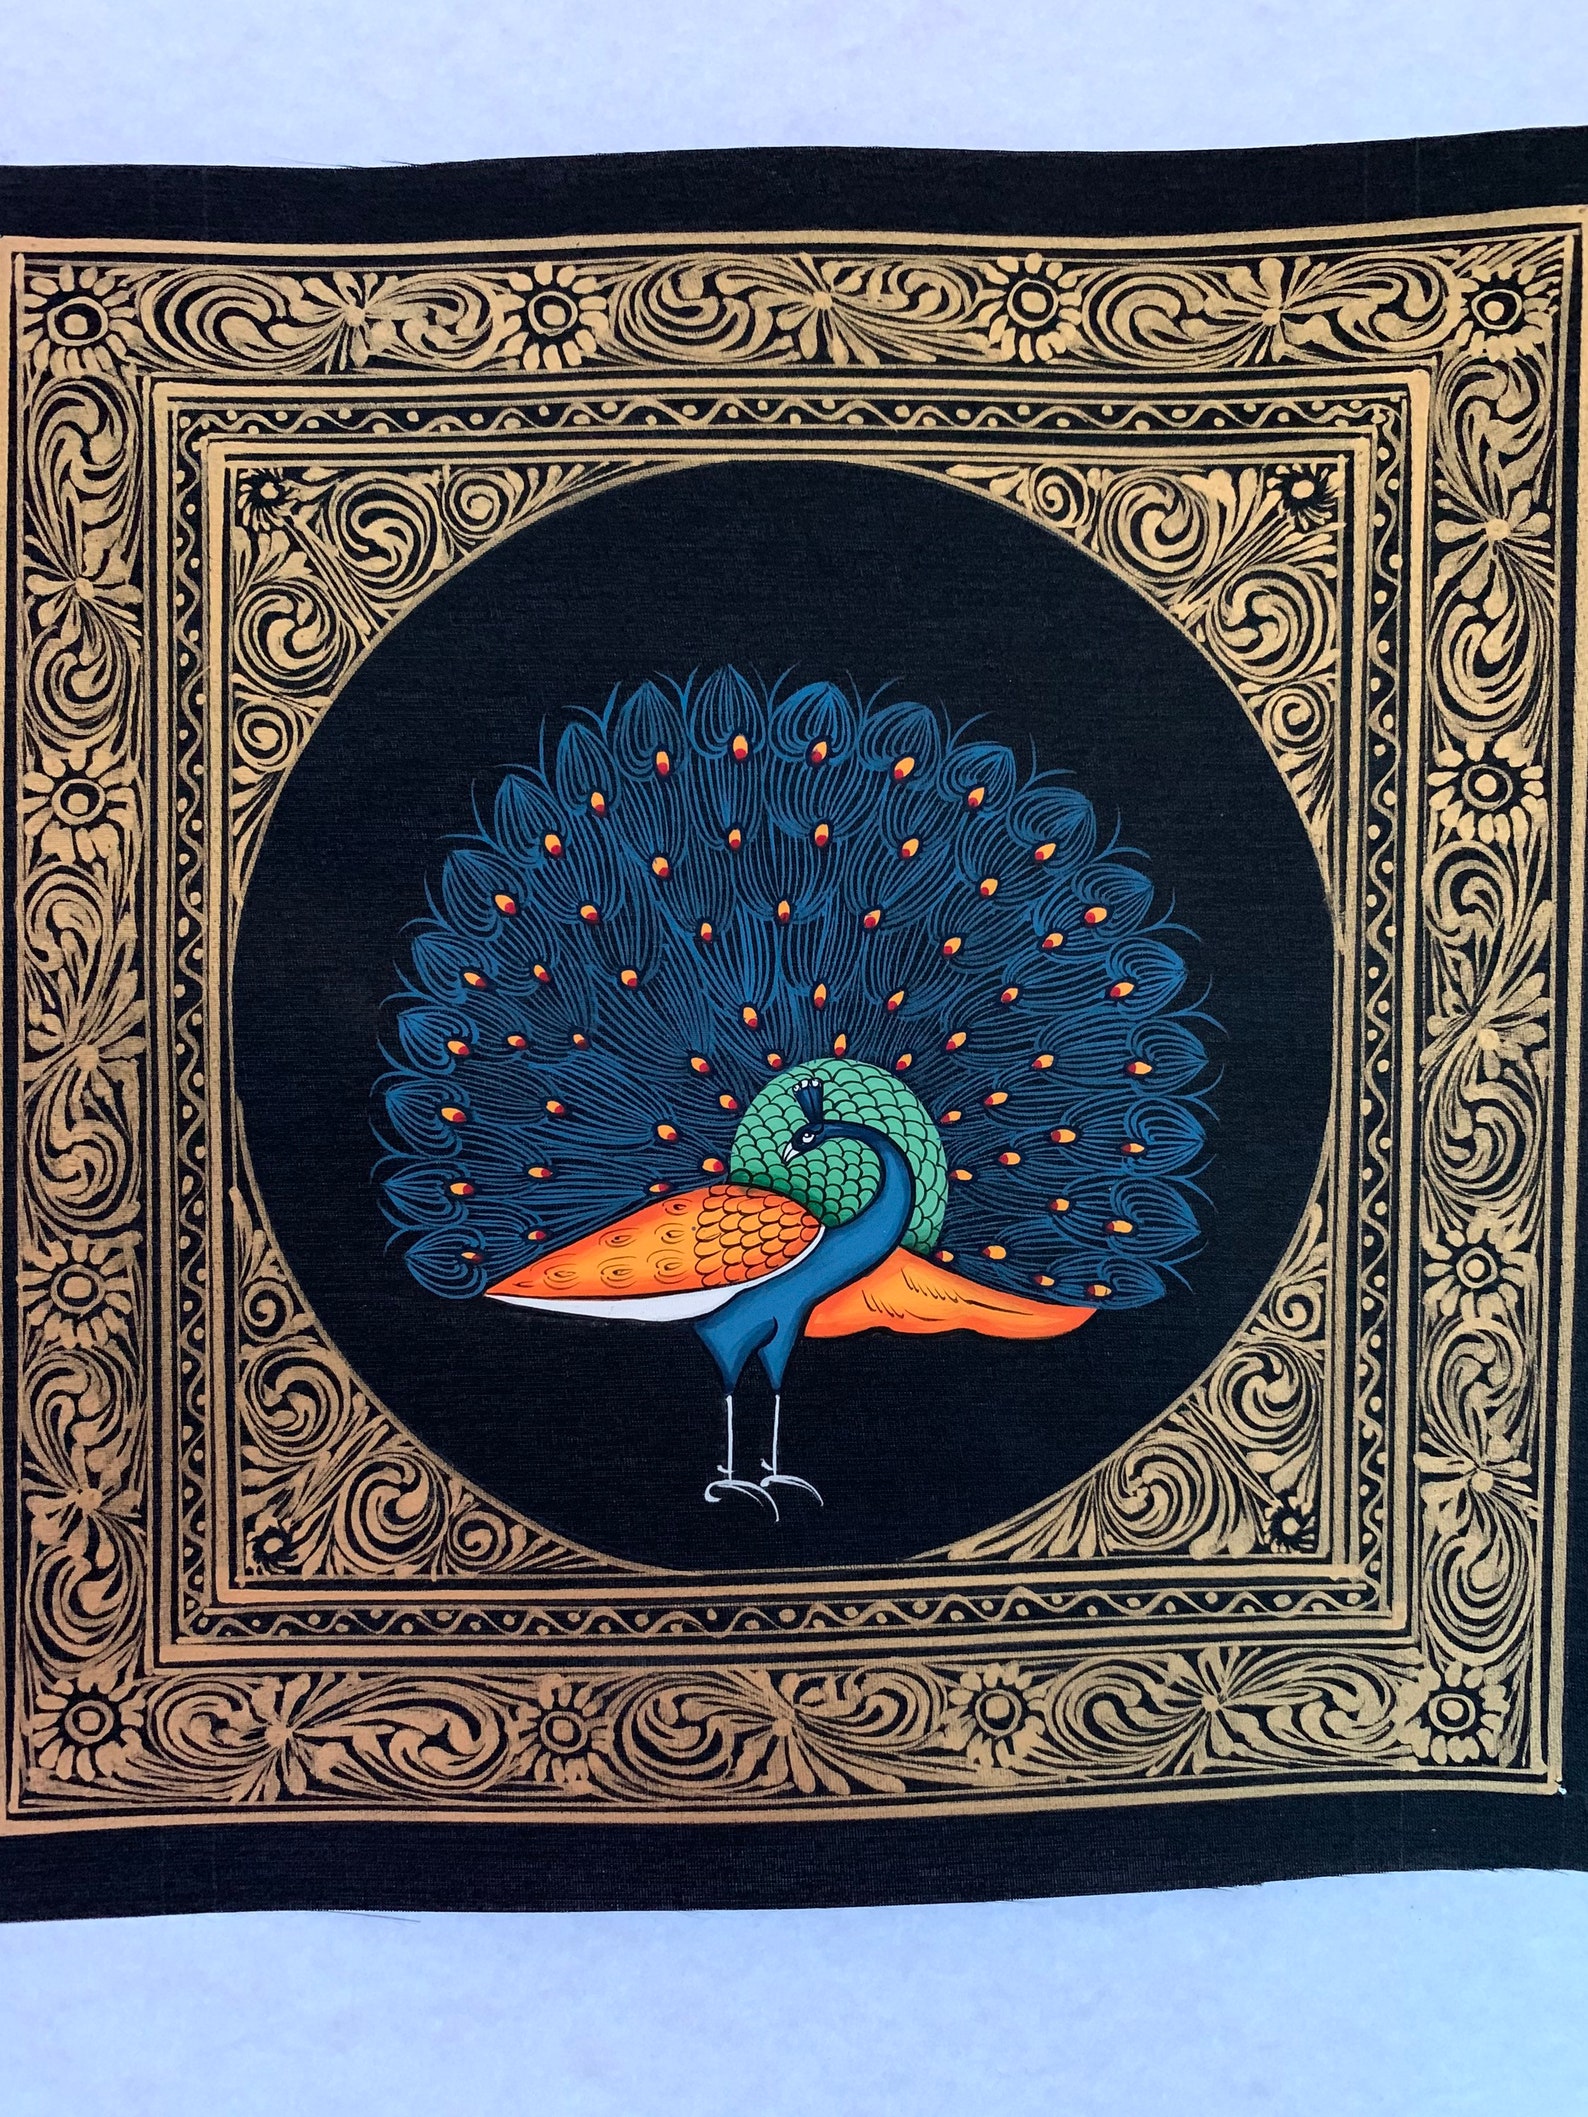 Peacock Miniature Silk Paintings Mughal Art Work in Size 6 by - Etsy